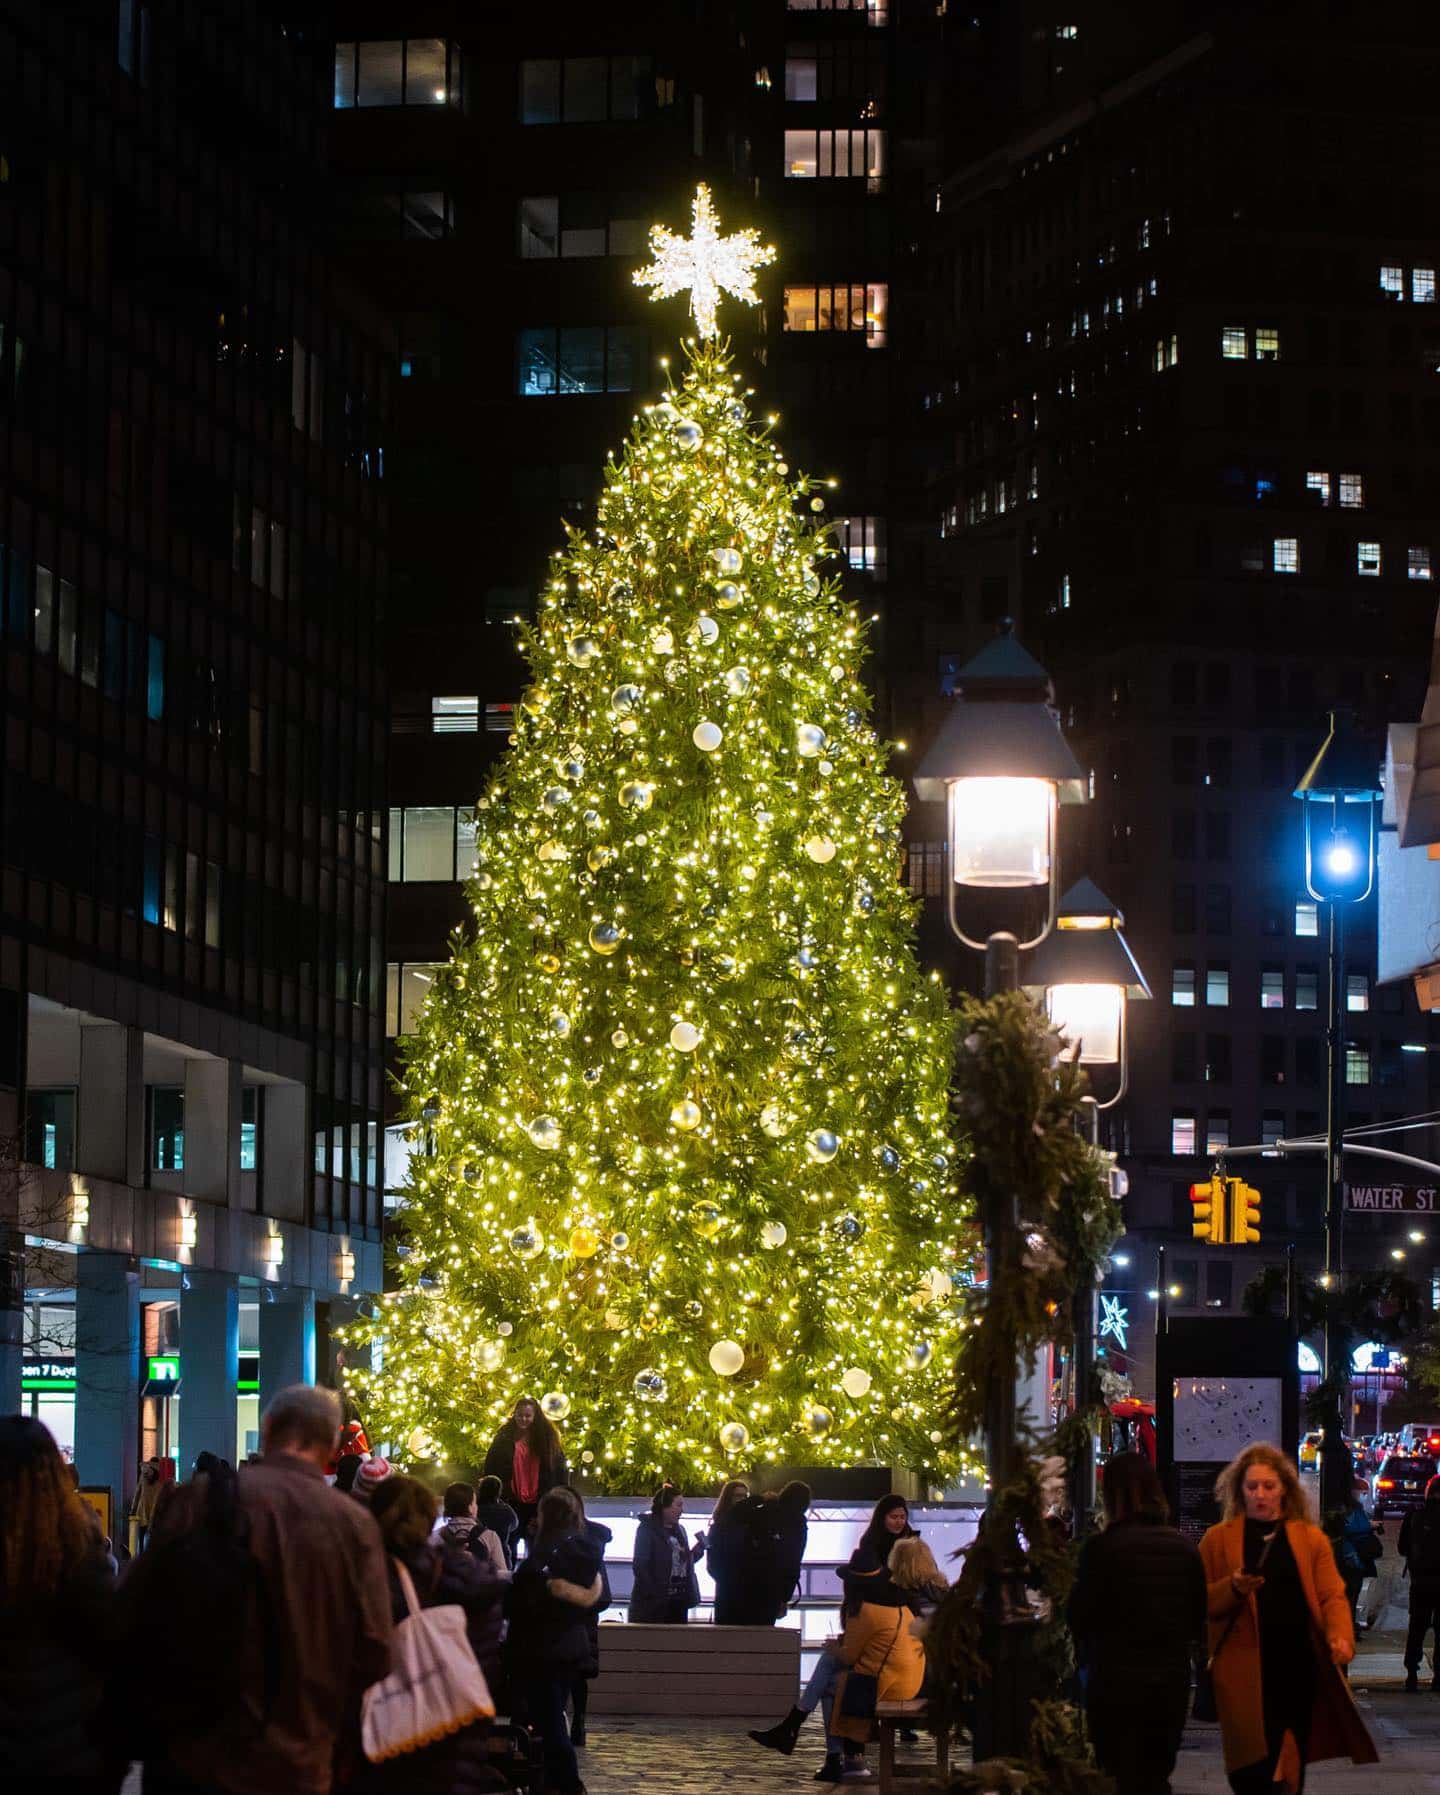 Holiday cheer. The streets all aglow. Live music. Festive fun. It’s almost time to make merry. Save the date for Holiday Tree lighting🖤 

Nov. 29 | 5pm
Details ➤ link in bio.